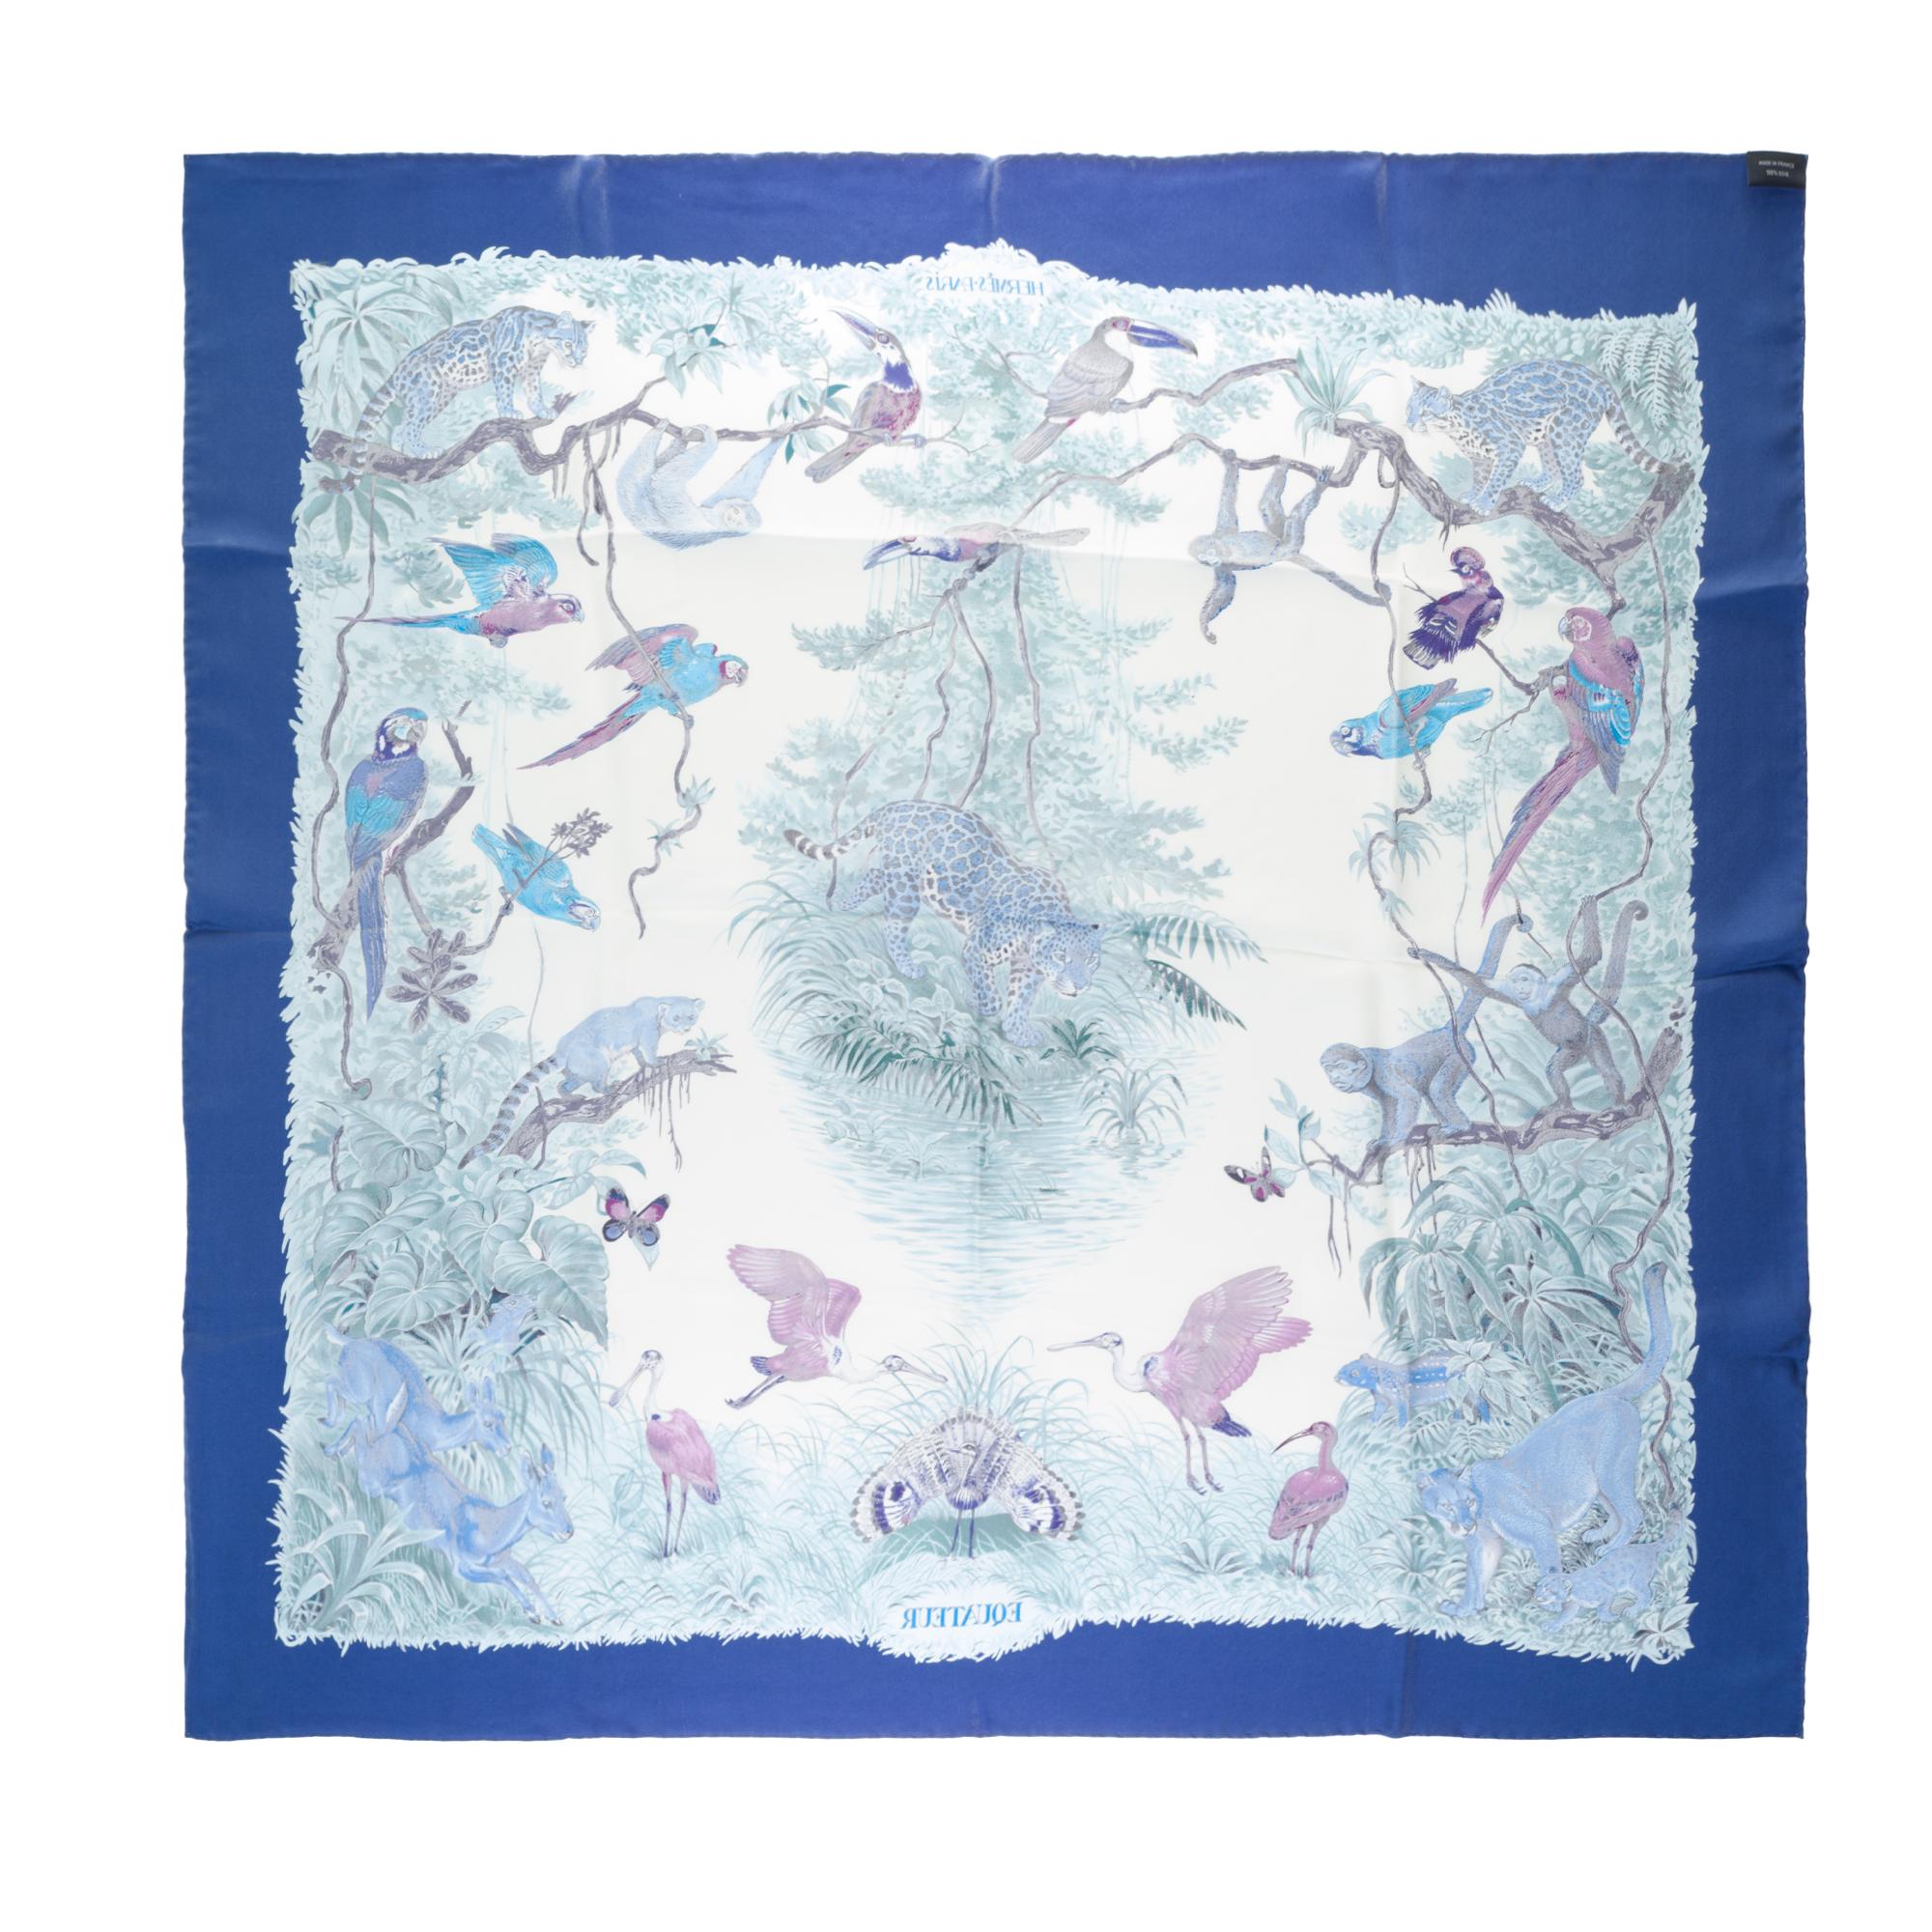 Beautiful Hermès square with animal designs signed Robert DALLET in twill wash on blue, white and green background.
Signature: 